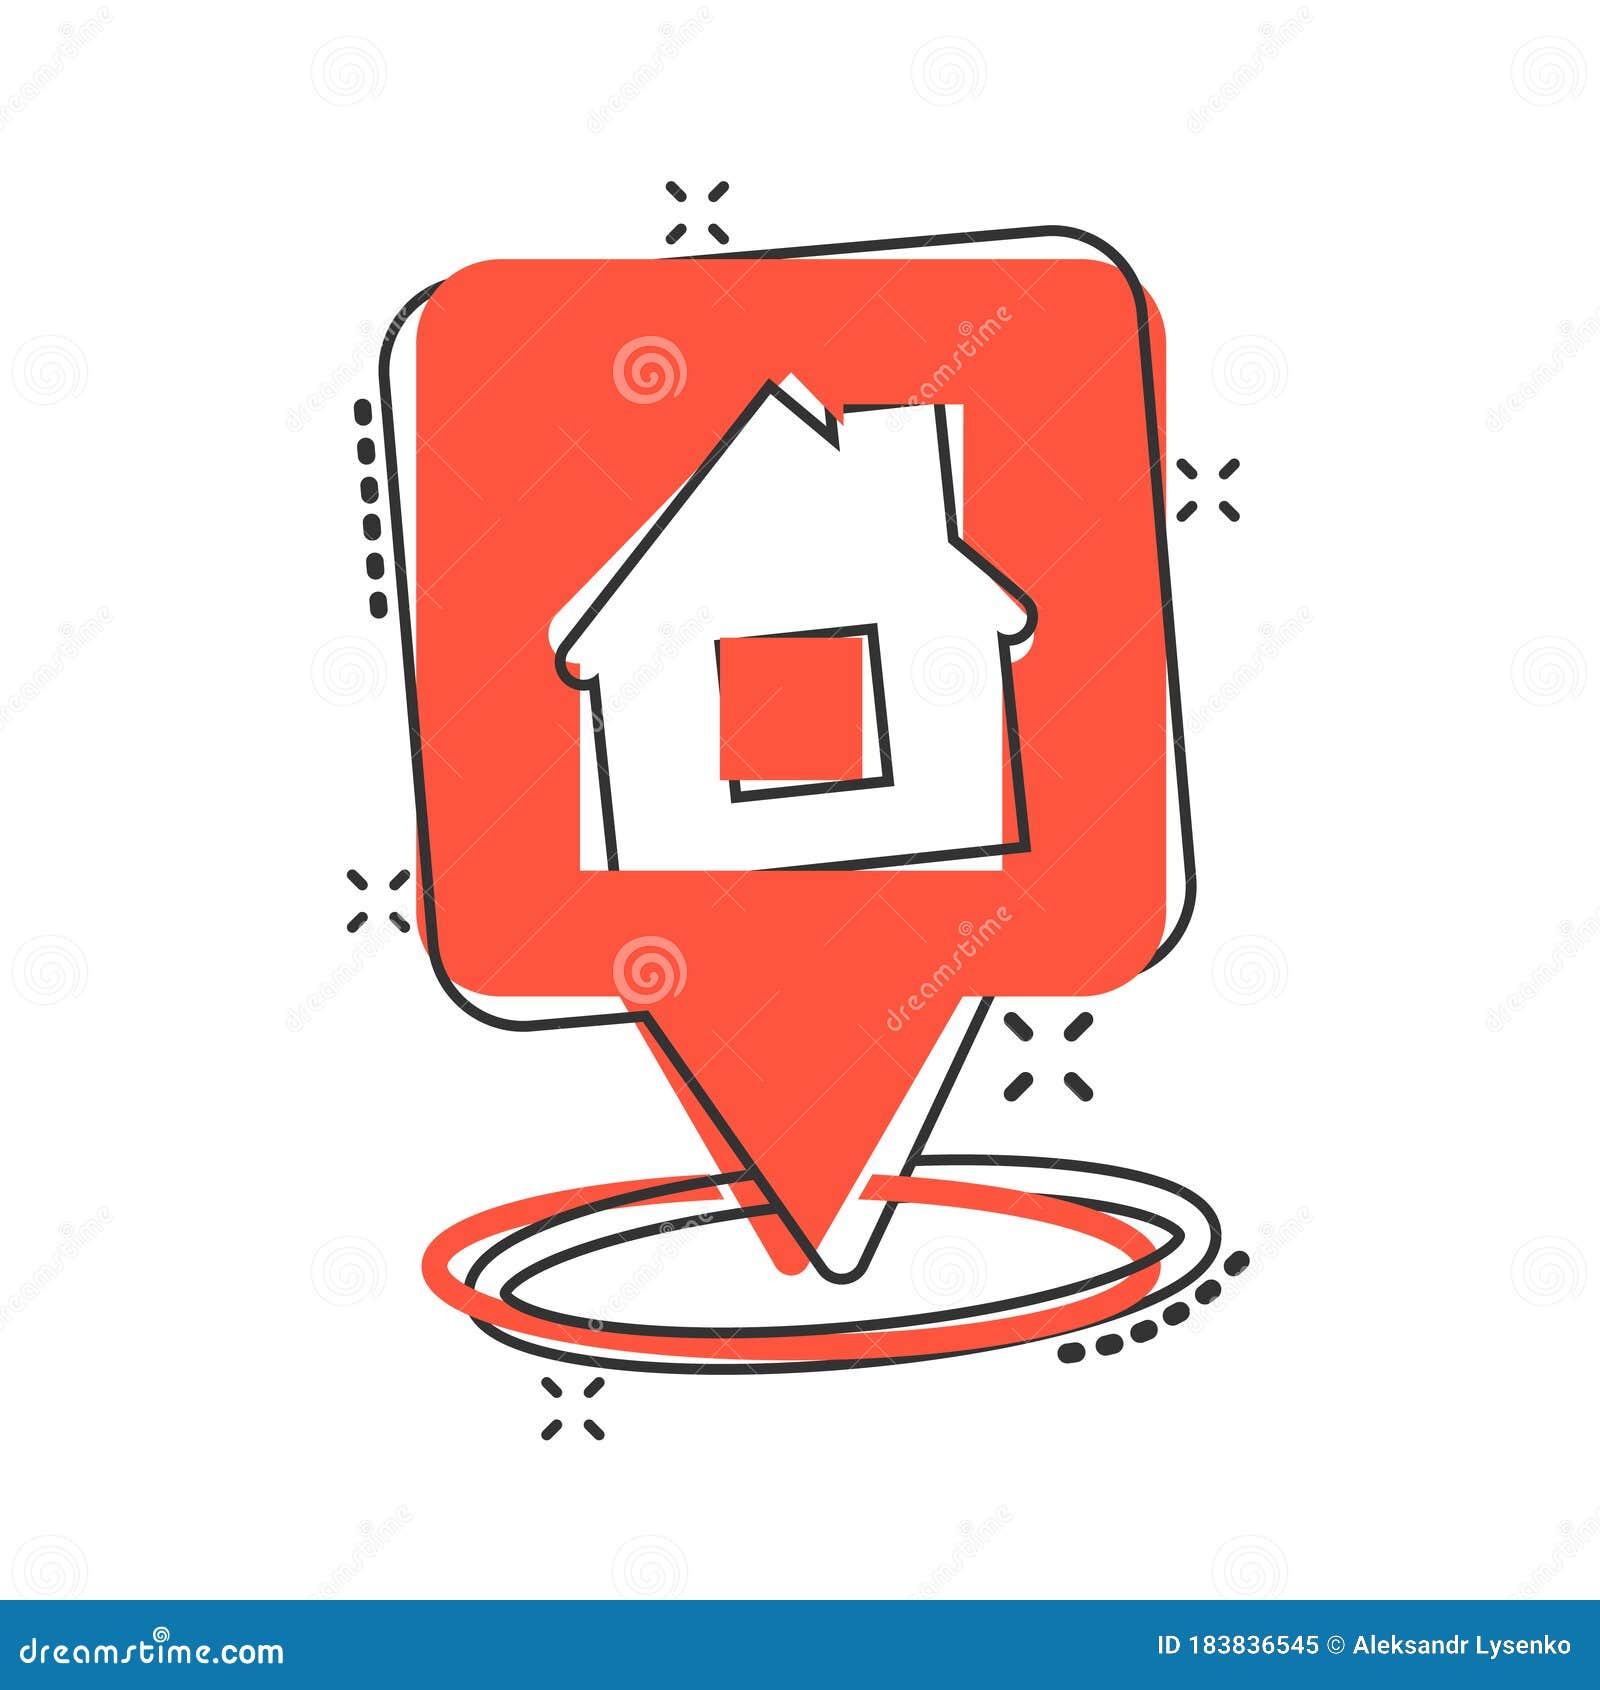 Home Pin Icon in Comic Style. House Navigation Cartoon Vector Illustration  on White Isolated Background Stock Vector - Illustration of place, house:  183836545